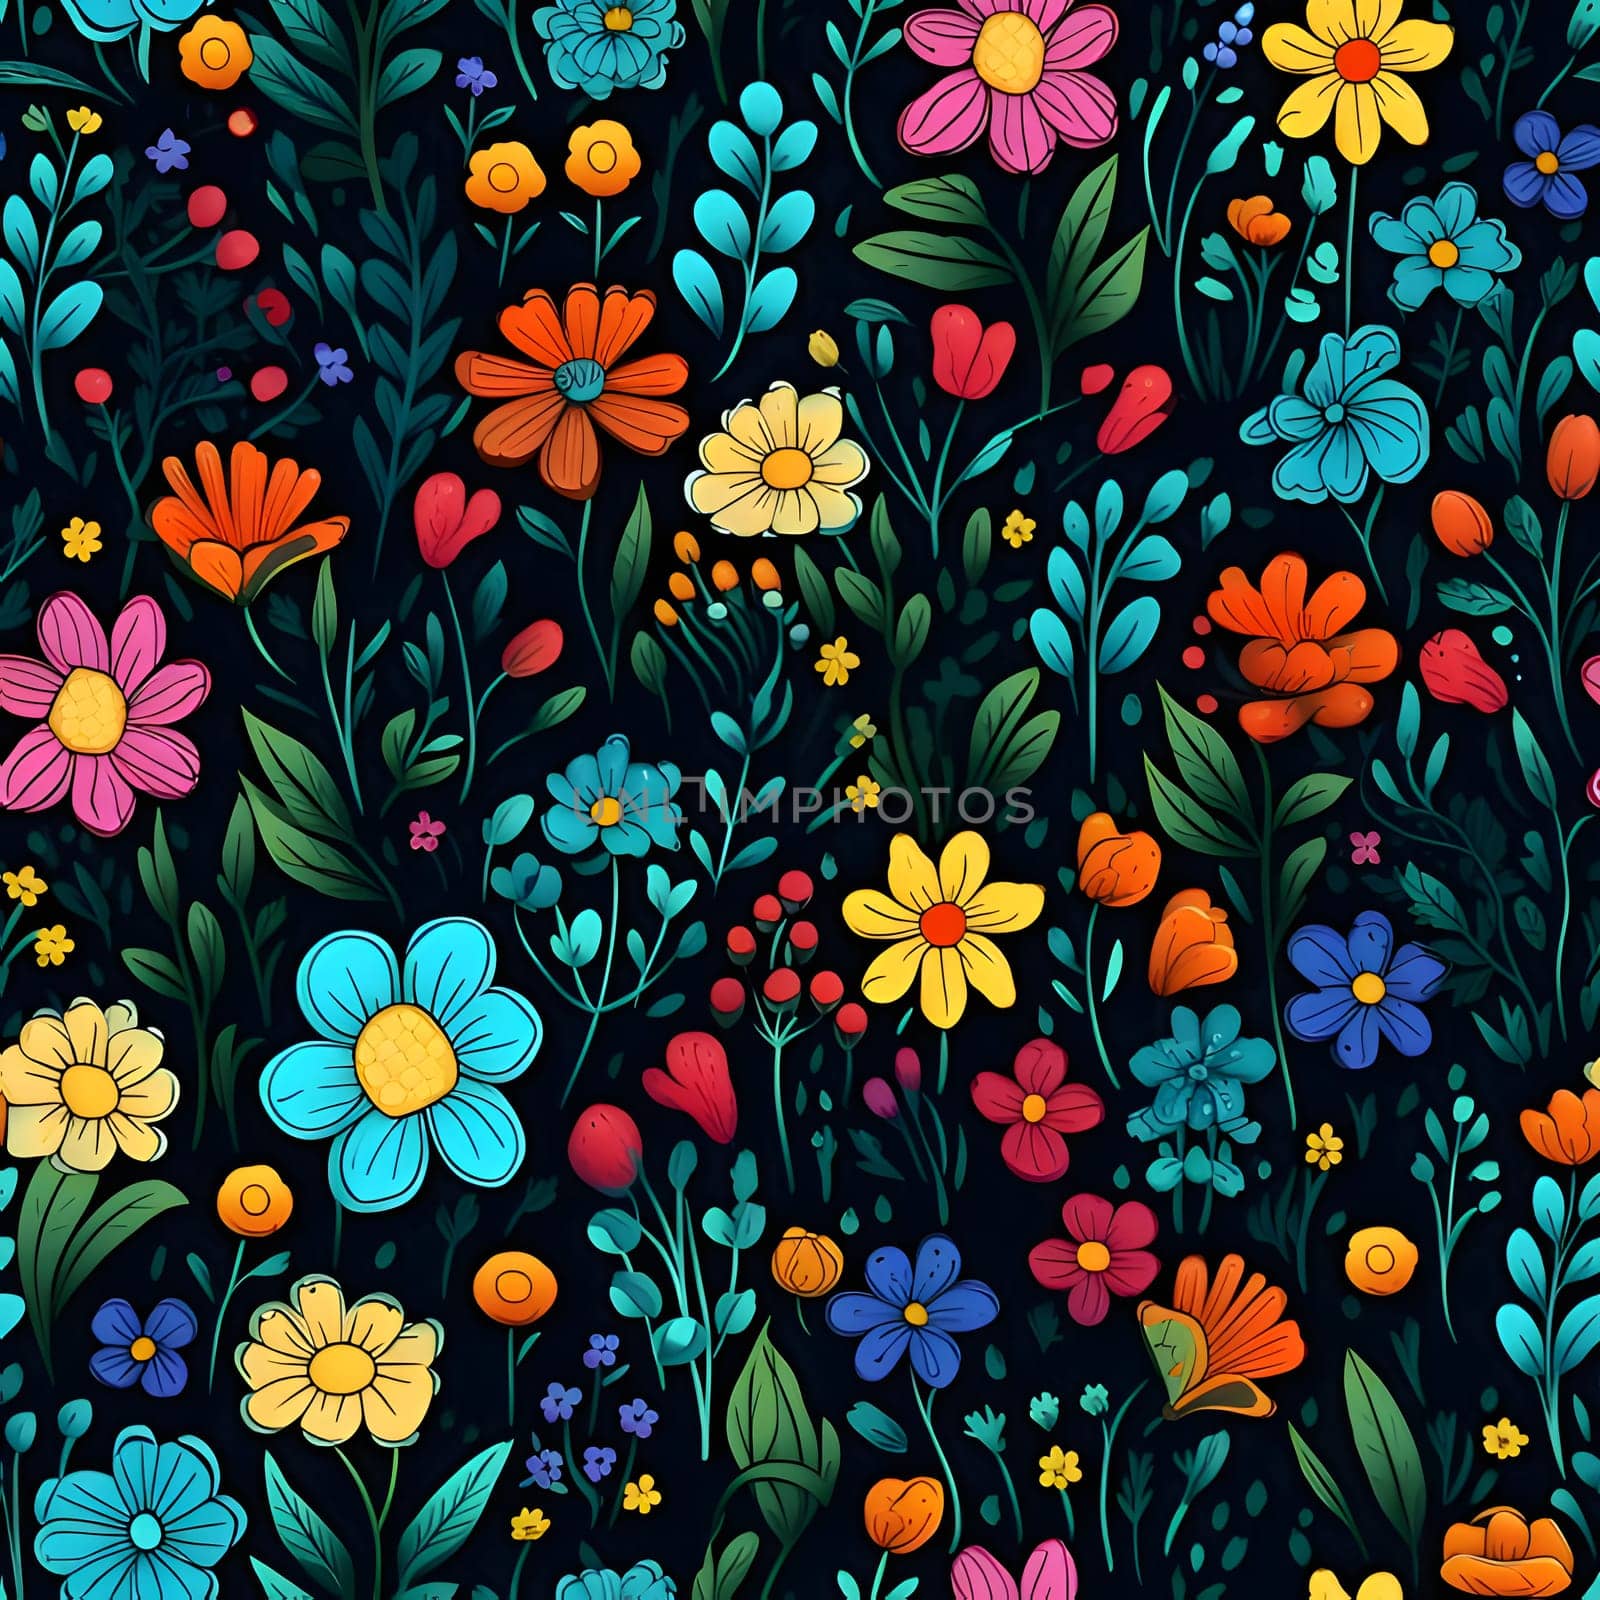 Patterns and banners backgrounds: Seamless pattern with colorful flowers on dark background. Vector illustration.